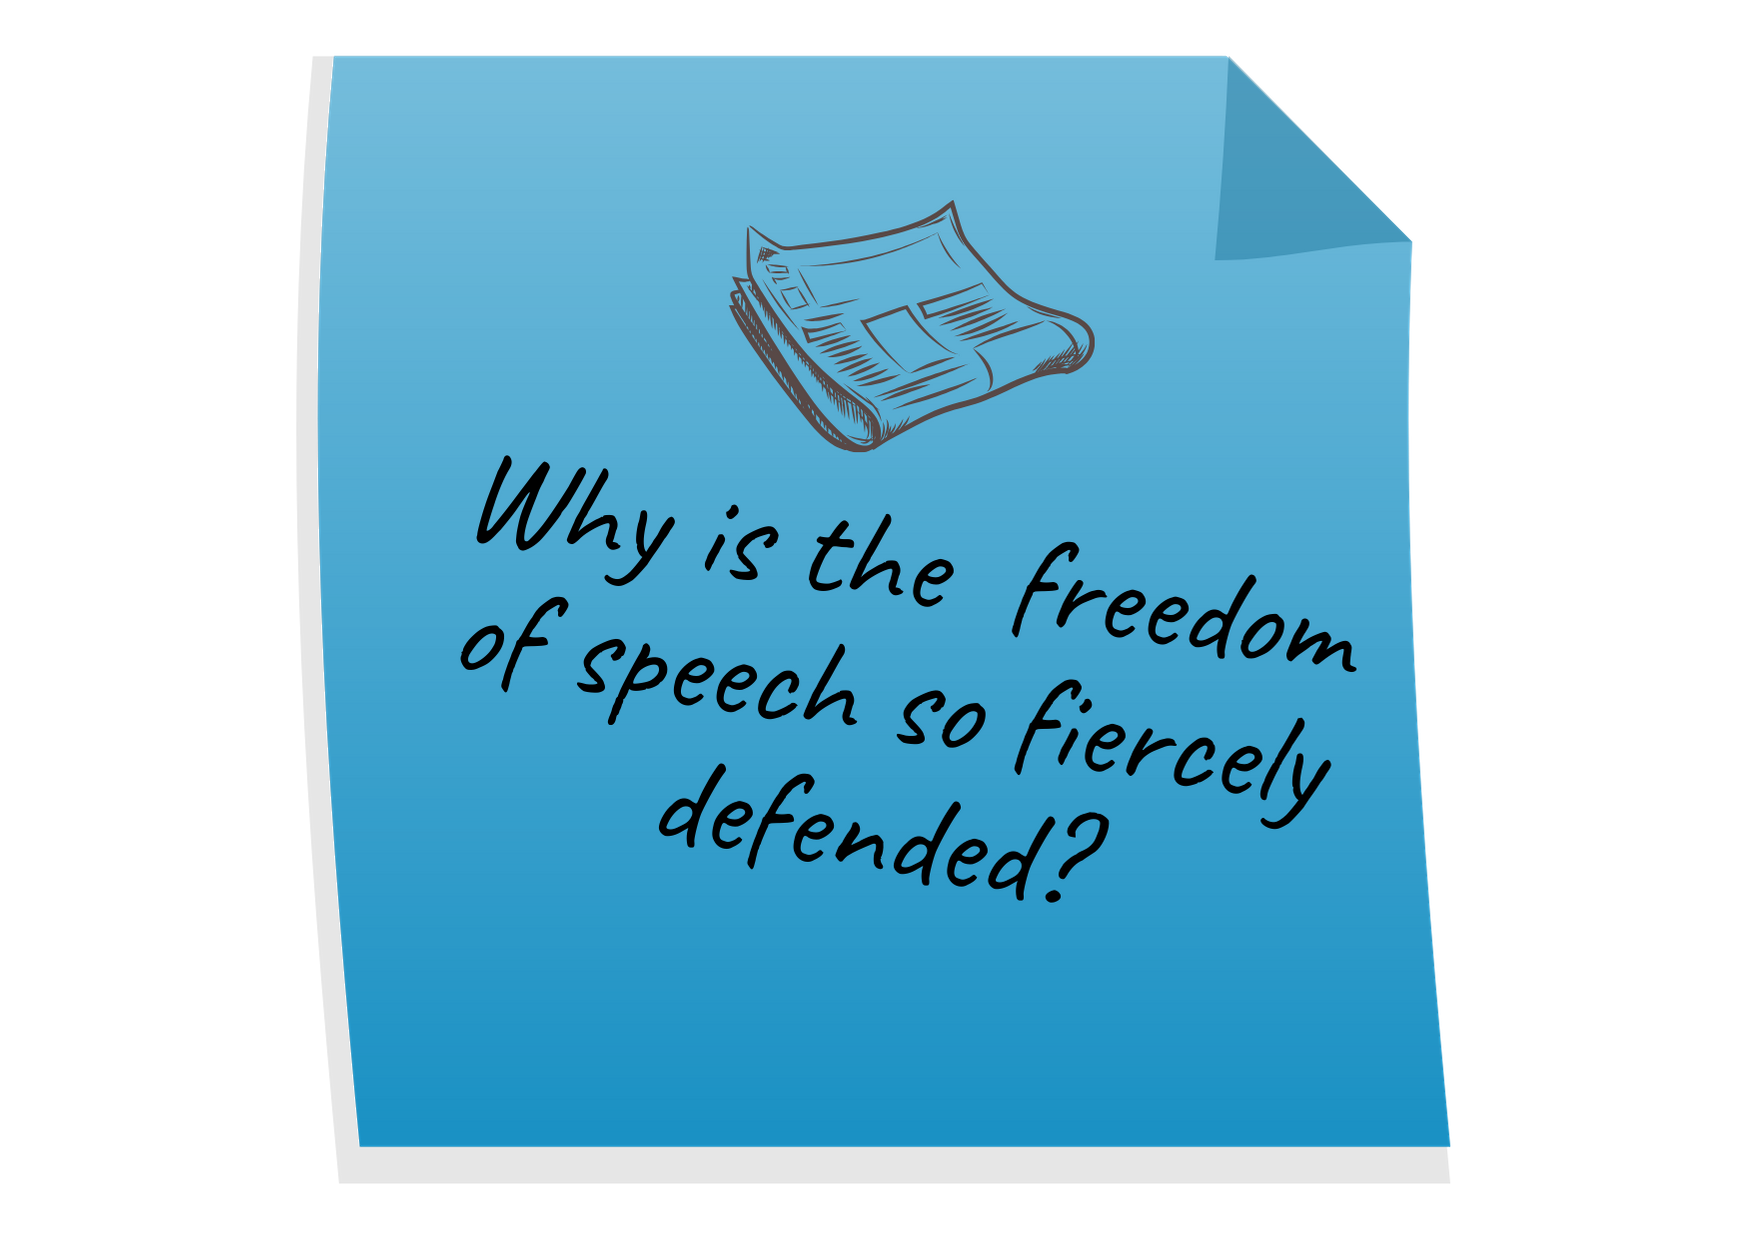 sketch of newspaper, words: Why is the freedom of speech so fiercely defended?